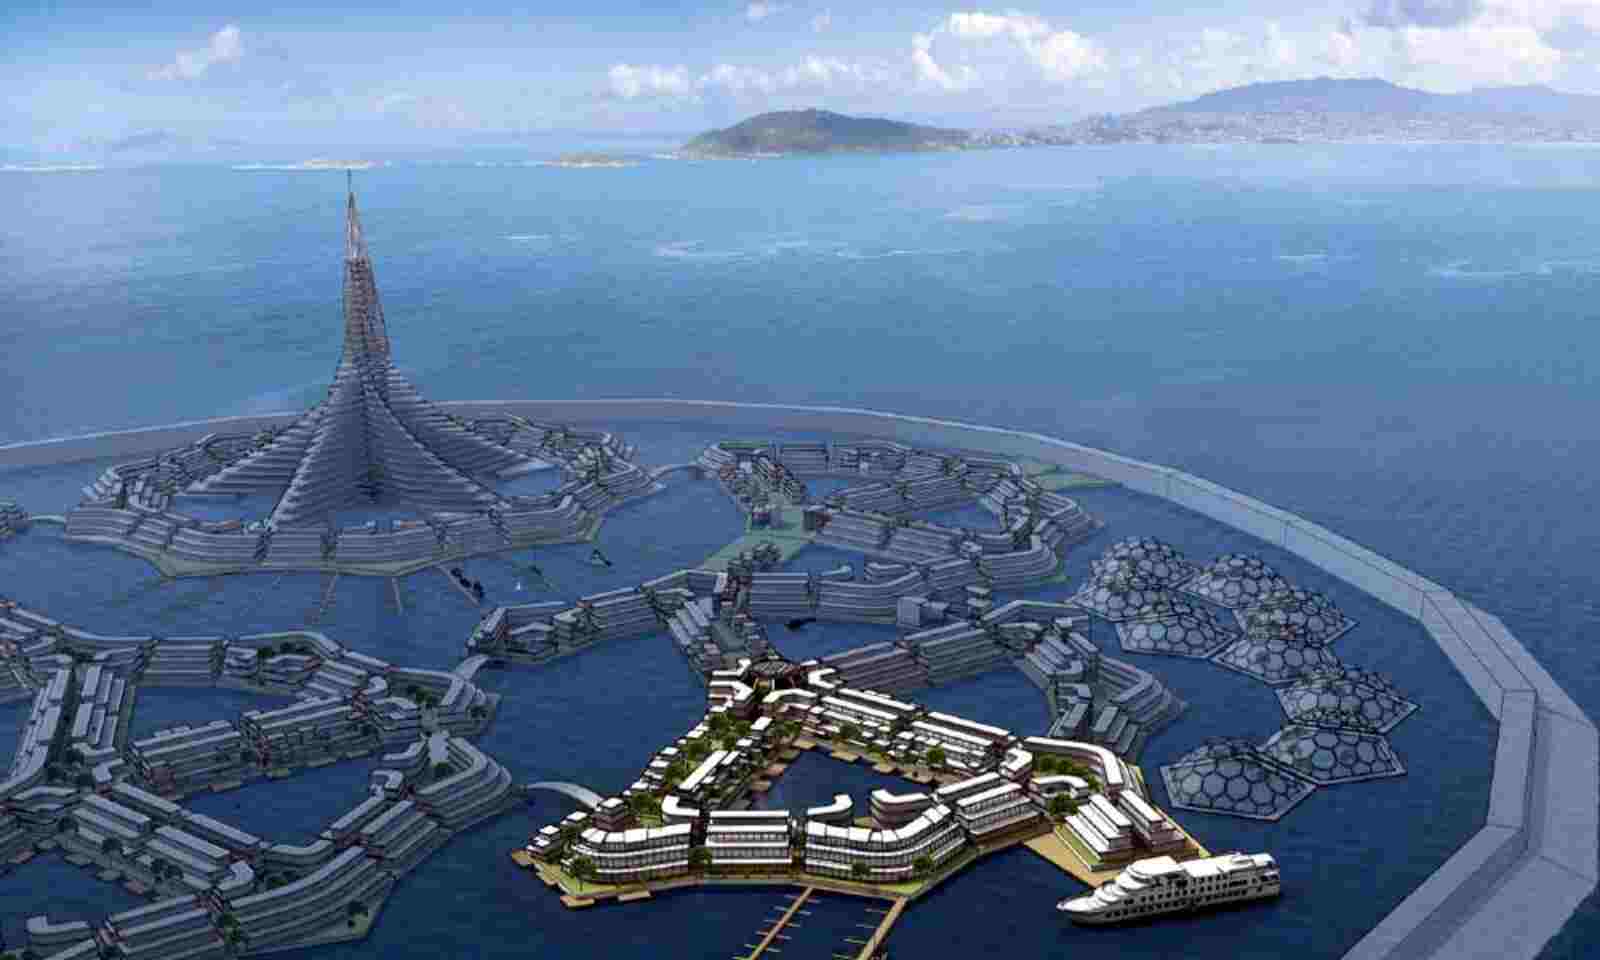 Oxagon: 4 Things You Need to Know about Saudi Arabia’s Floating City